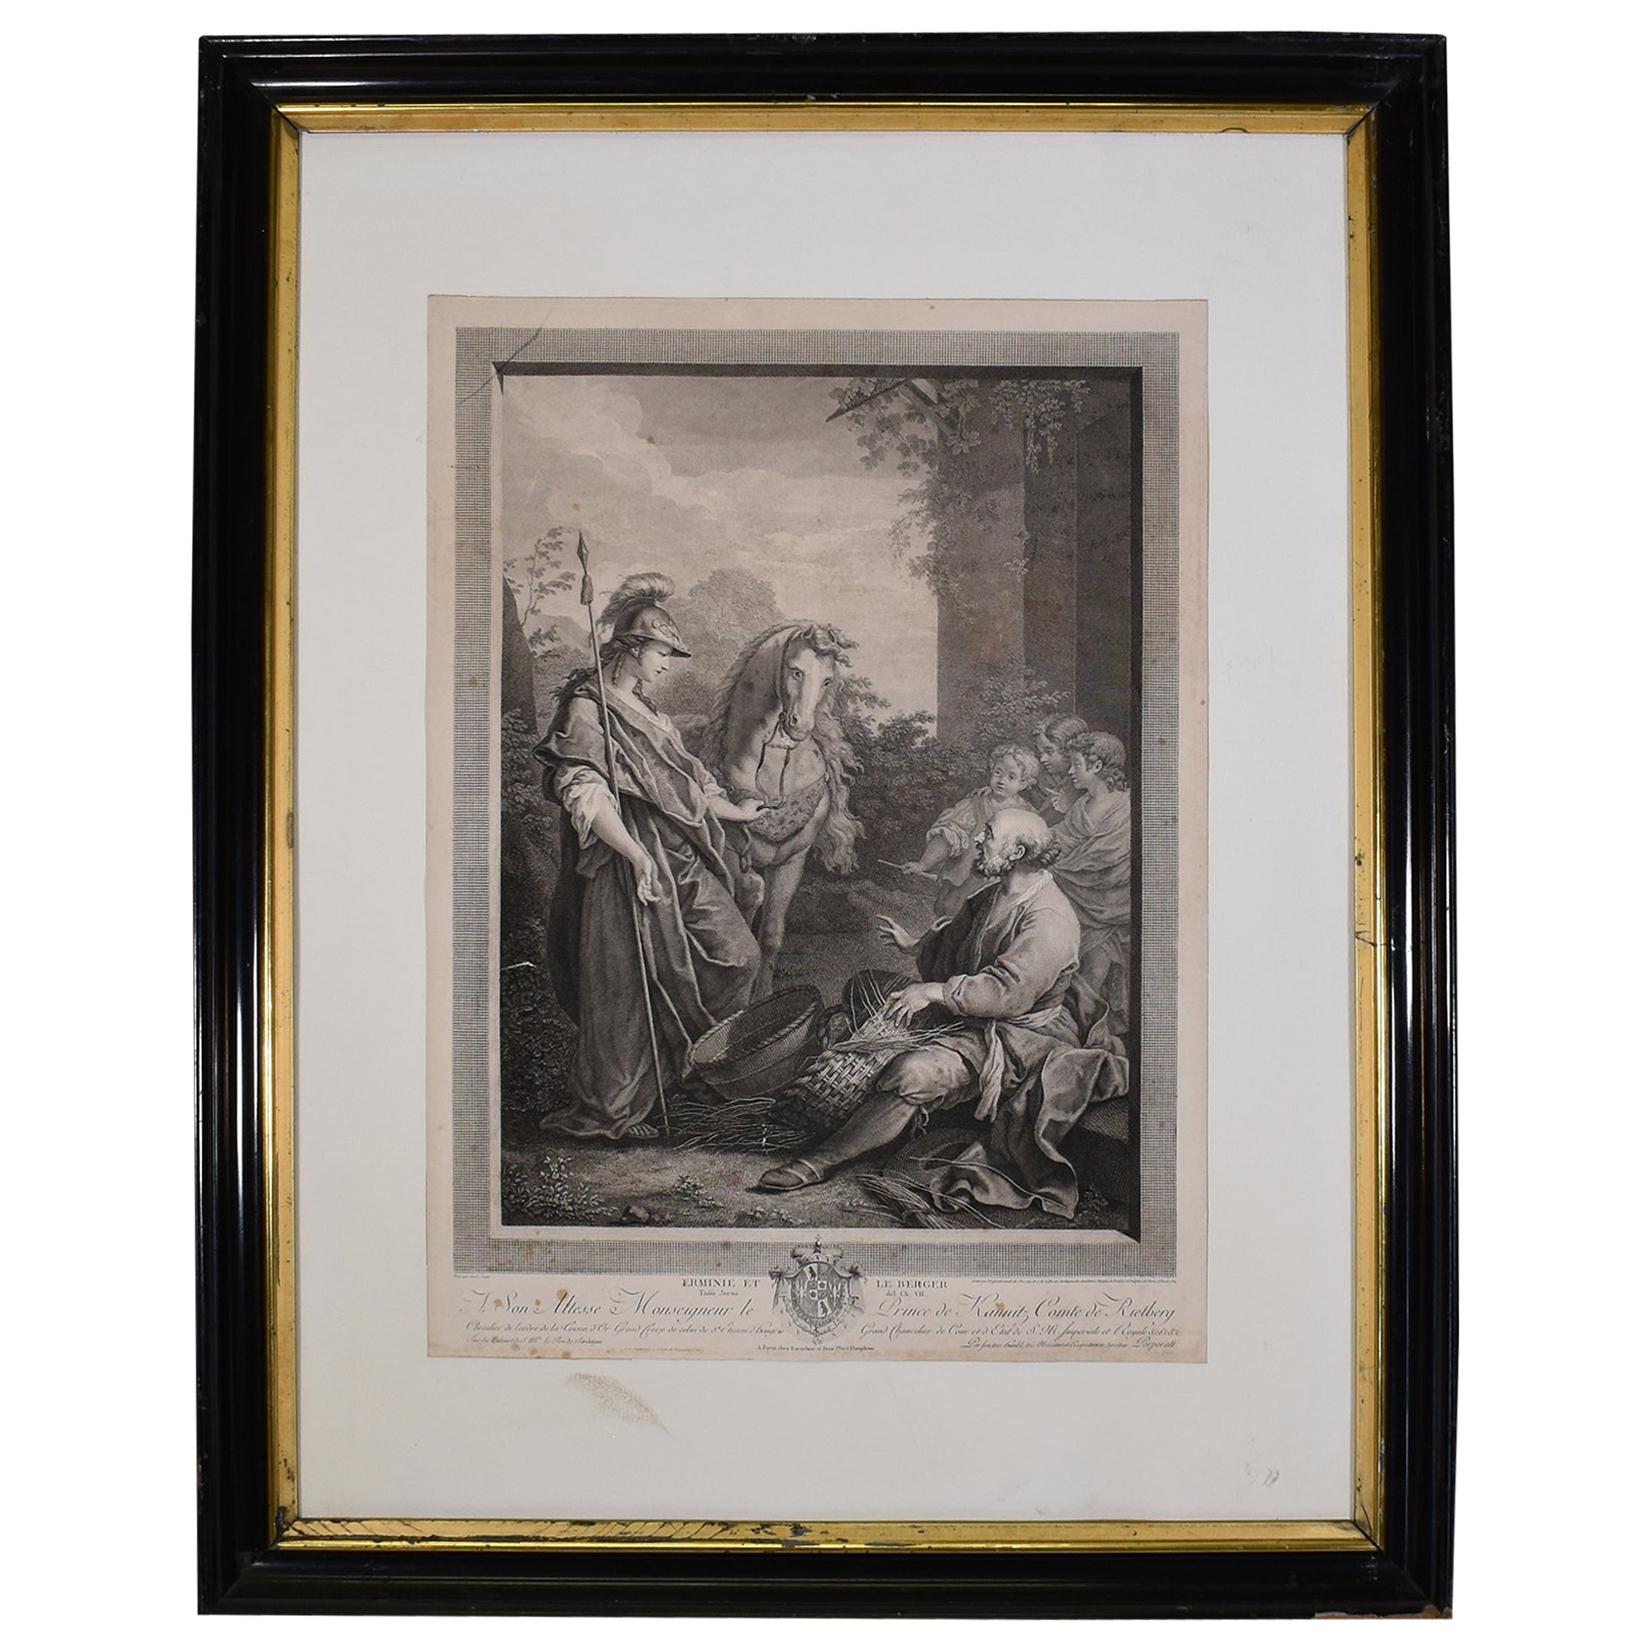 19th Century Engraving or Print in Frame